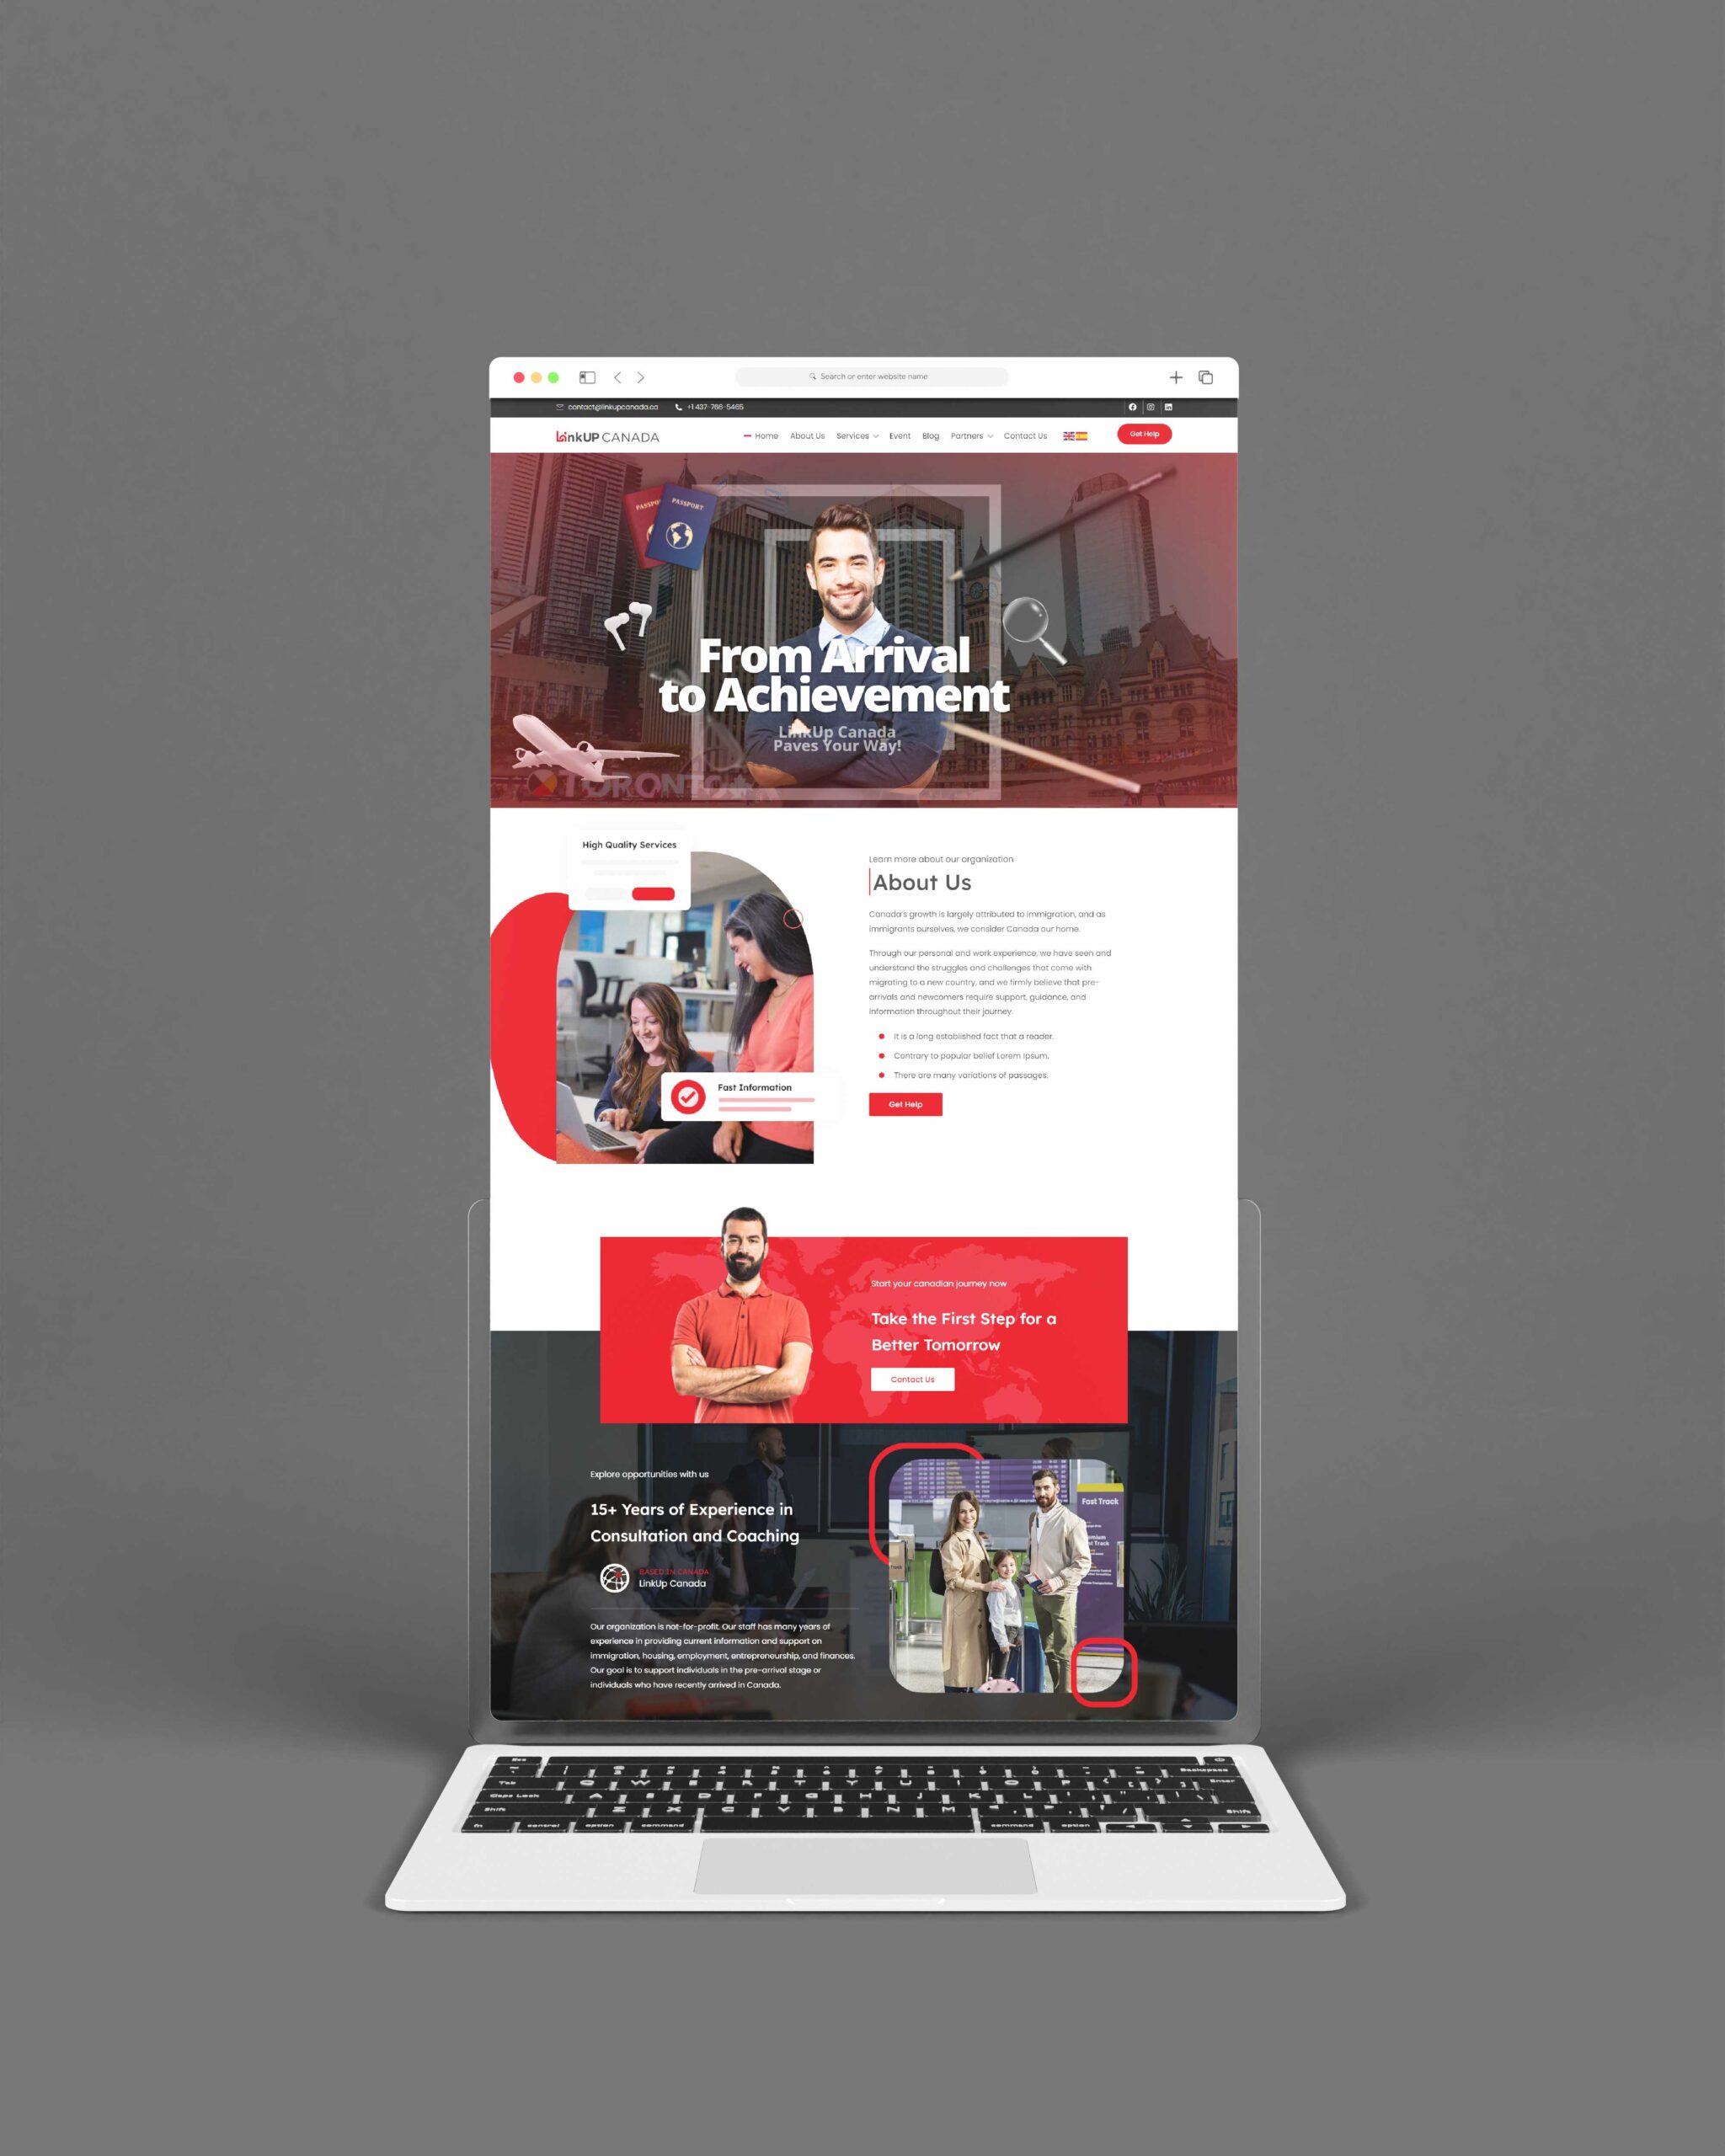 A mockup displaying a website homepage on a laptop screen, featuring sections about company services, team introductions, and client testimonials, predominantly designed in red and white colors.